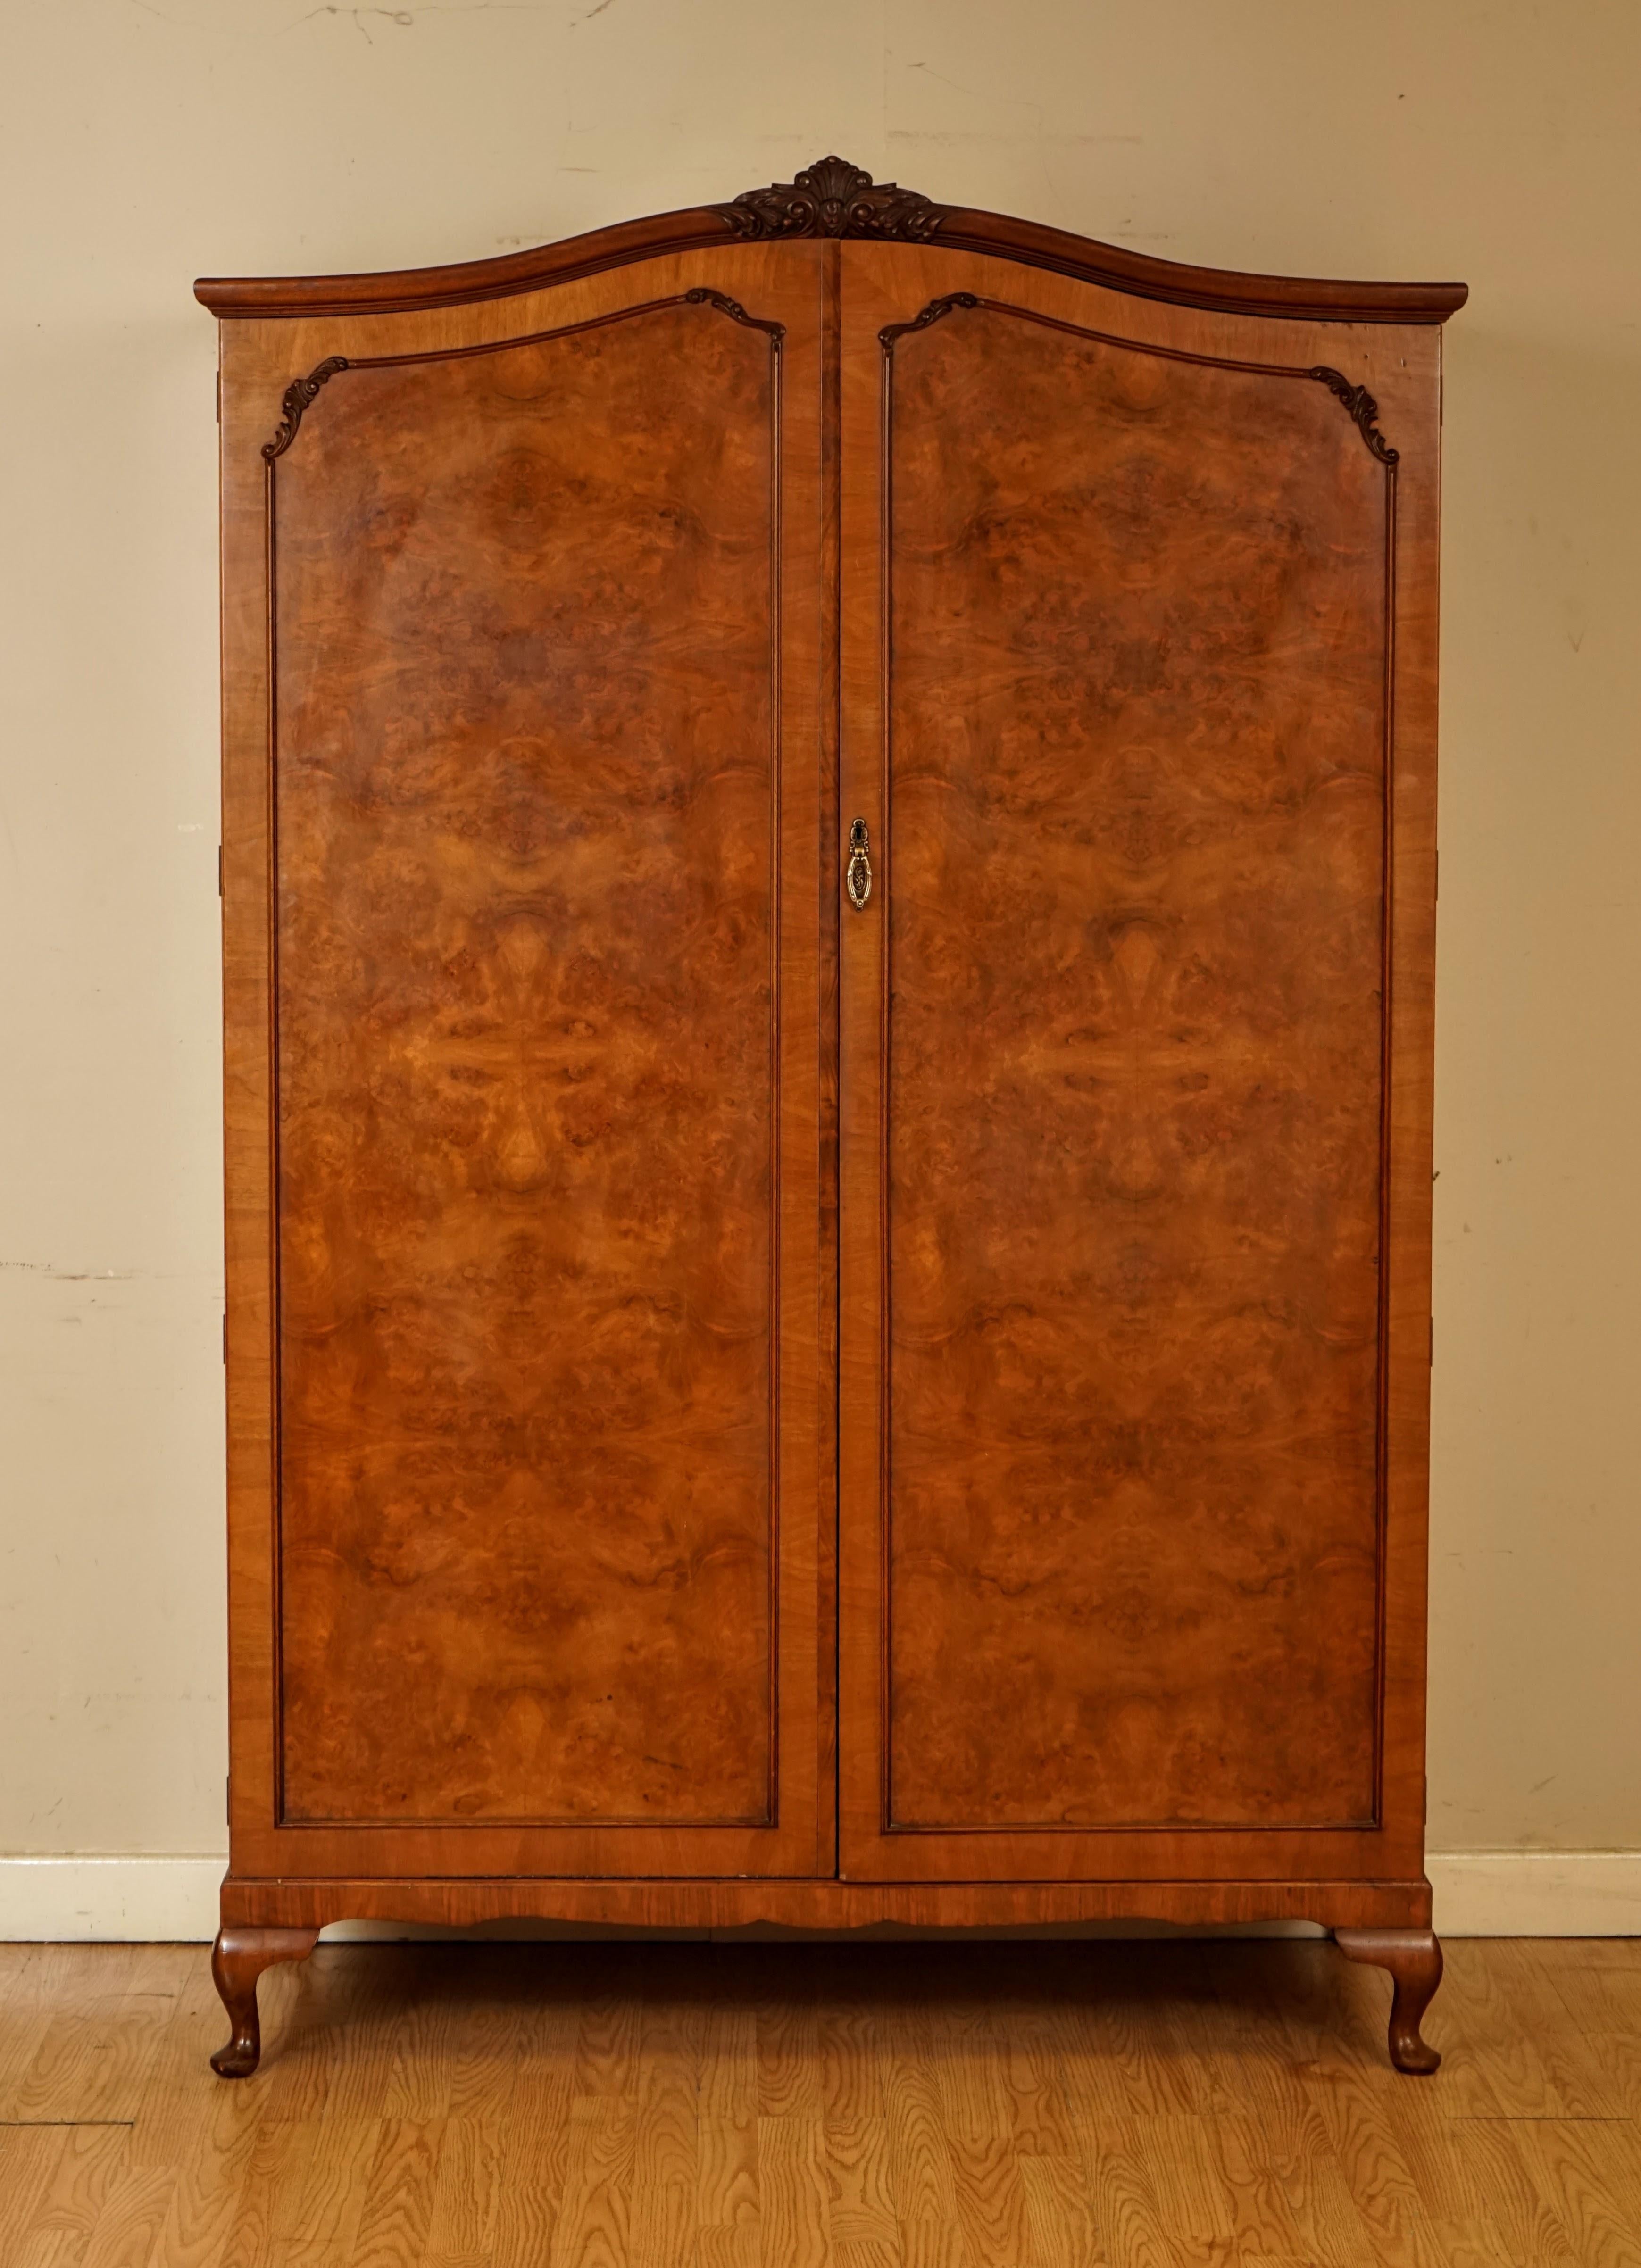 Hand-Crafted Beautiful Alfred COX London Carved Burr Walnut Double Wardrobe circa 1930's'2/2'